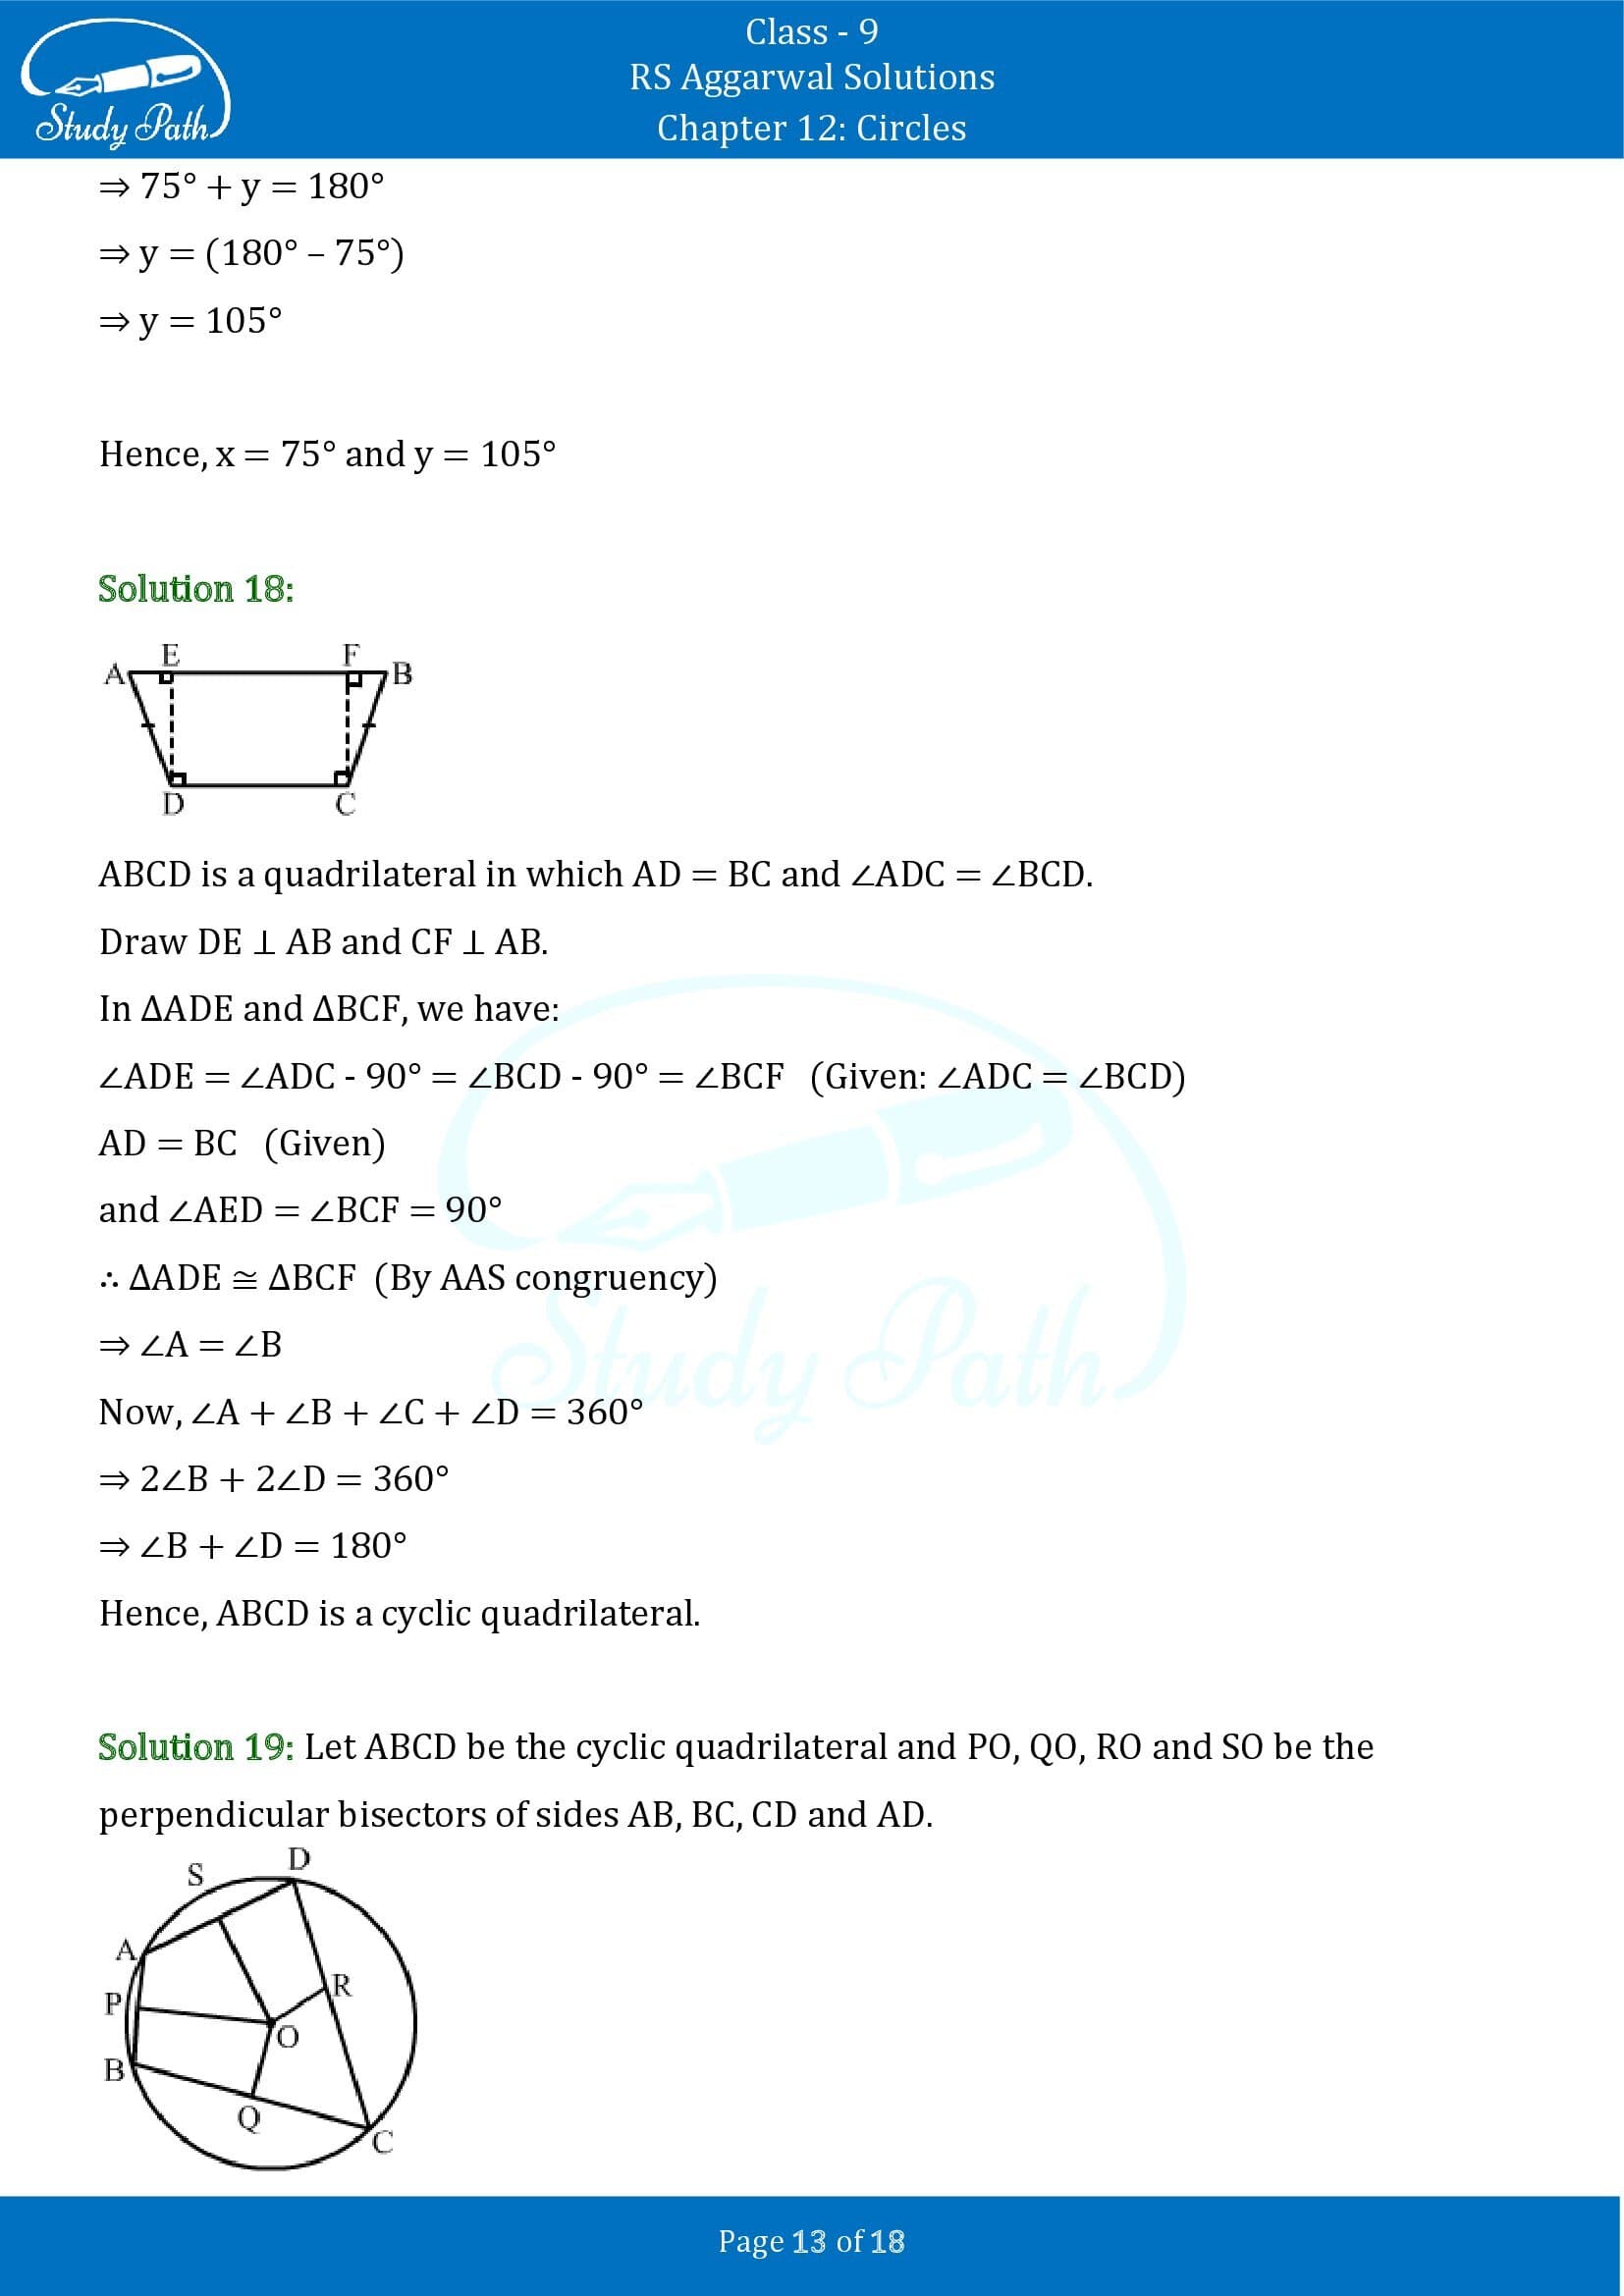 RS Aggarwal Solutions Class 9 Chapter 12 Circles Exercise 12C 00013